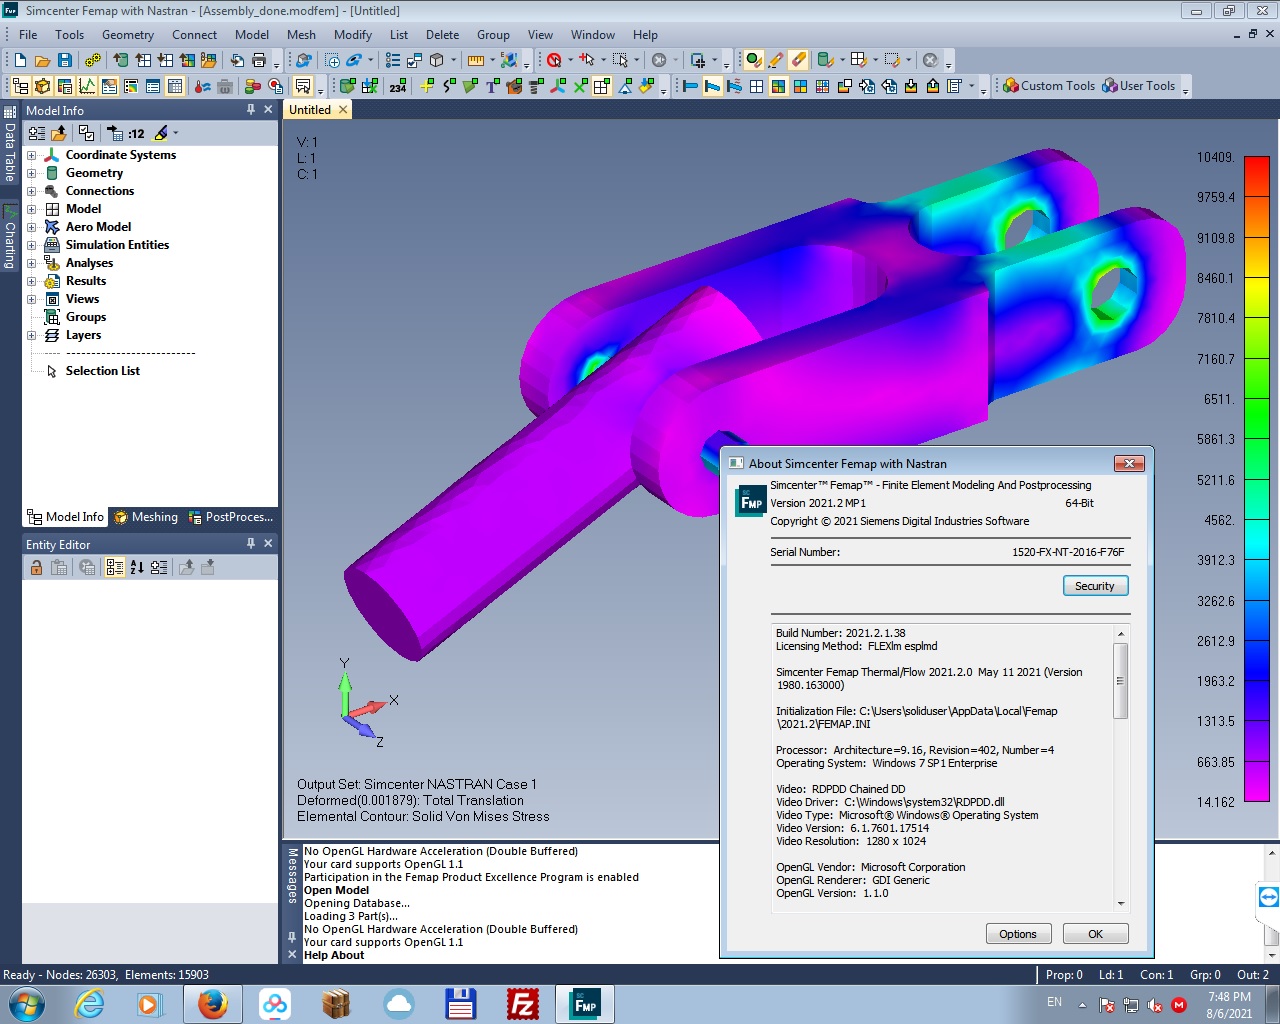 Working with Siemens Simcenter FEMAP 2021.2.1 with NX Nastran full